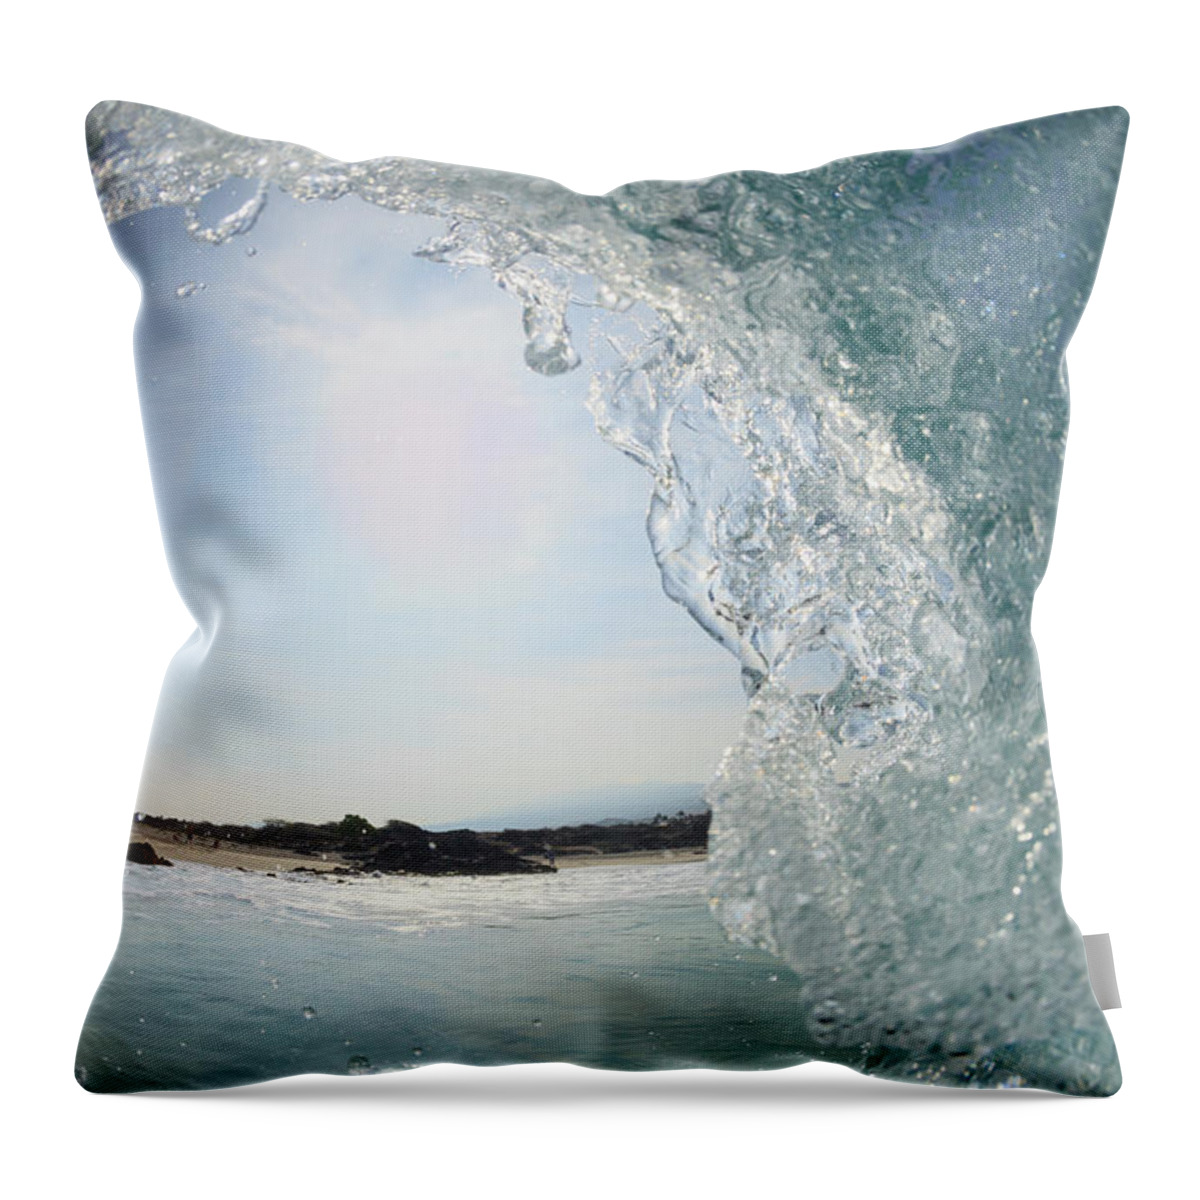 Curled Up Throw Pillow featuring the photograph Fisheye View Of Wave Breaks At Kua by Stuart Westmorland / Design Pics